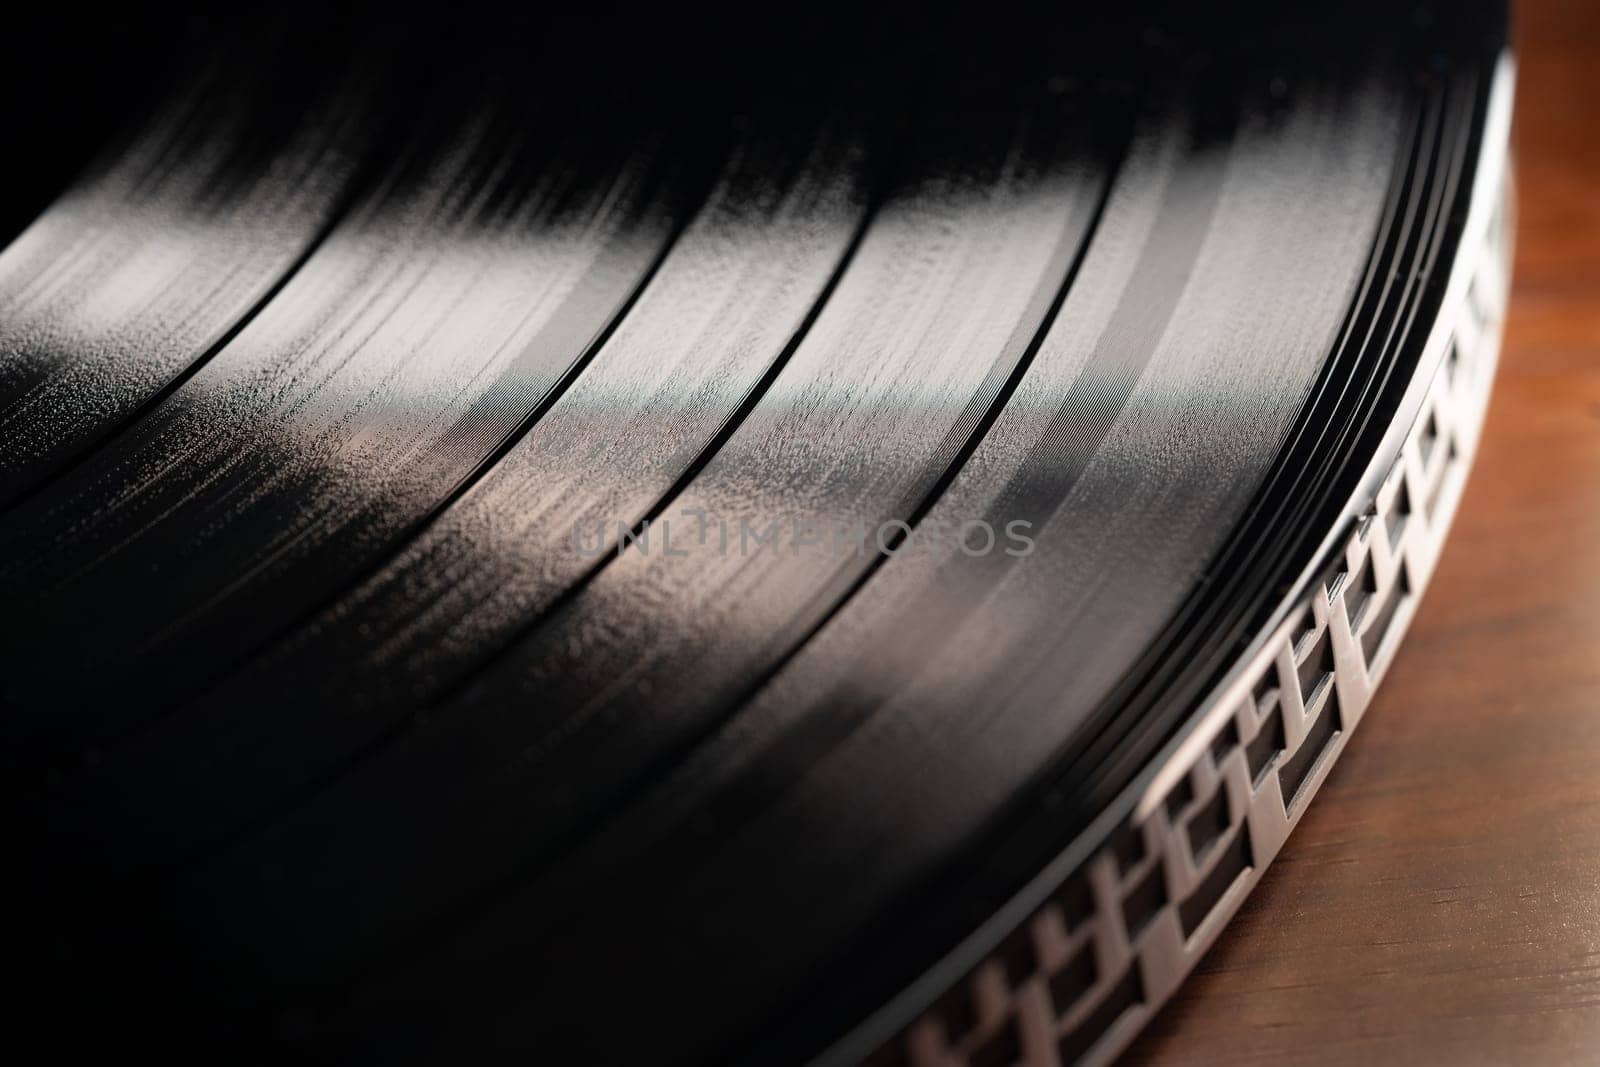 Classic vinyl record, turntable spin, analog sound, music concept. Celebrating retro vibes, vintage aesthetics. Macro dynamic motion. Iconic imagery. High quality